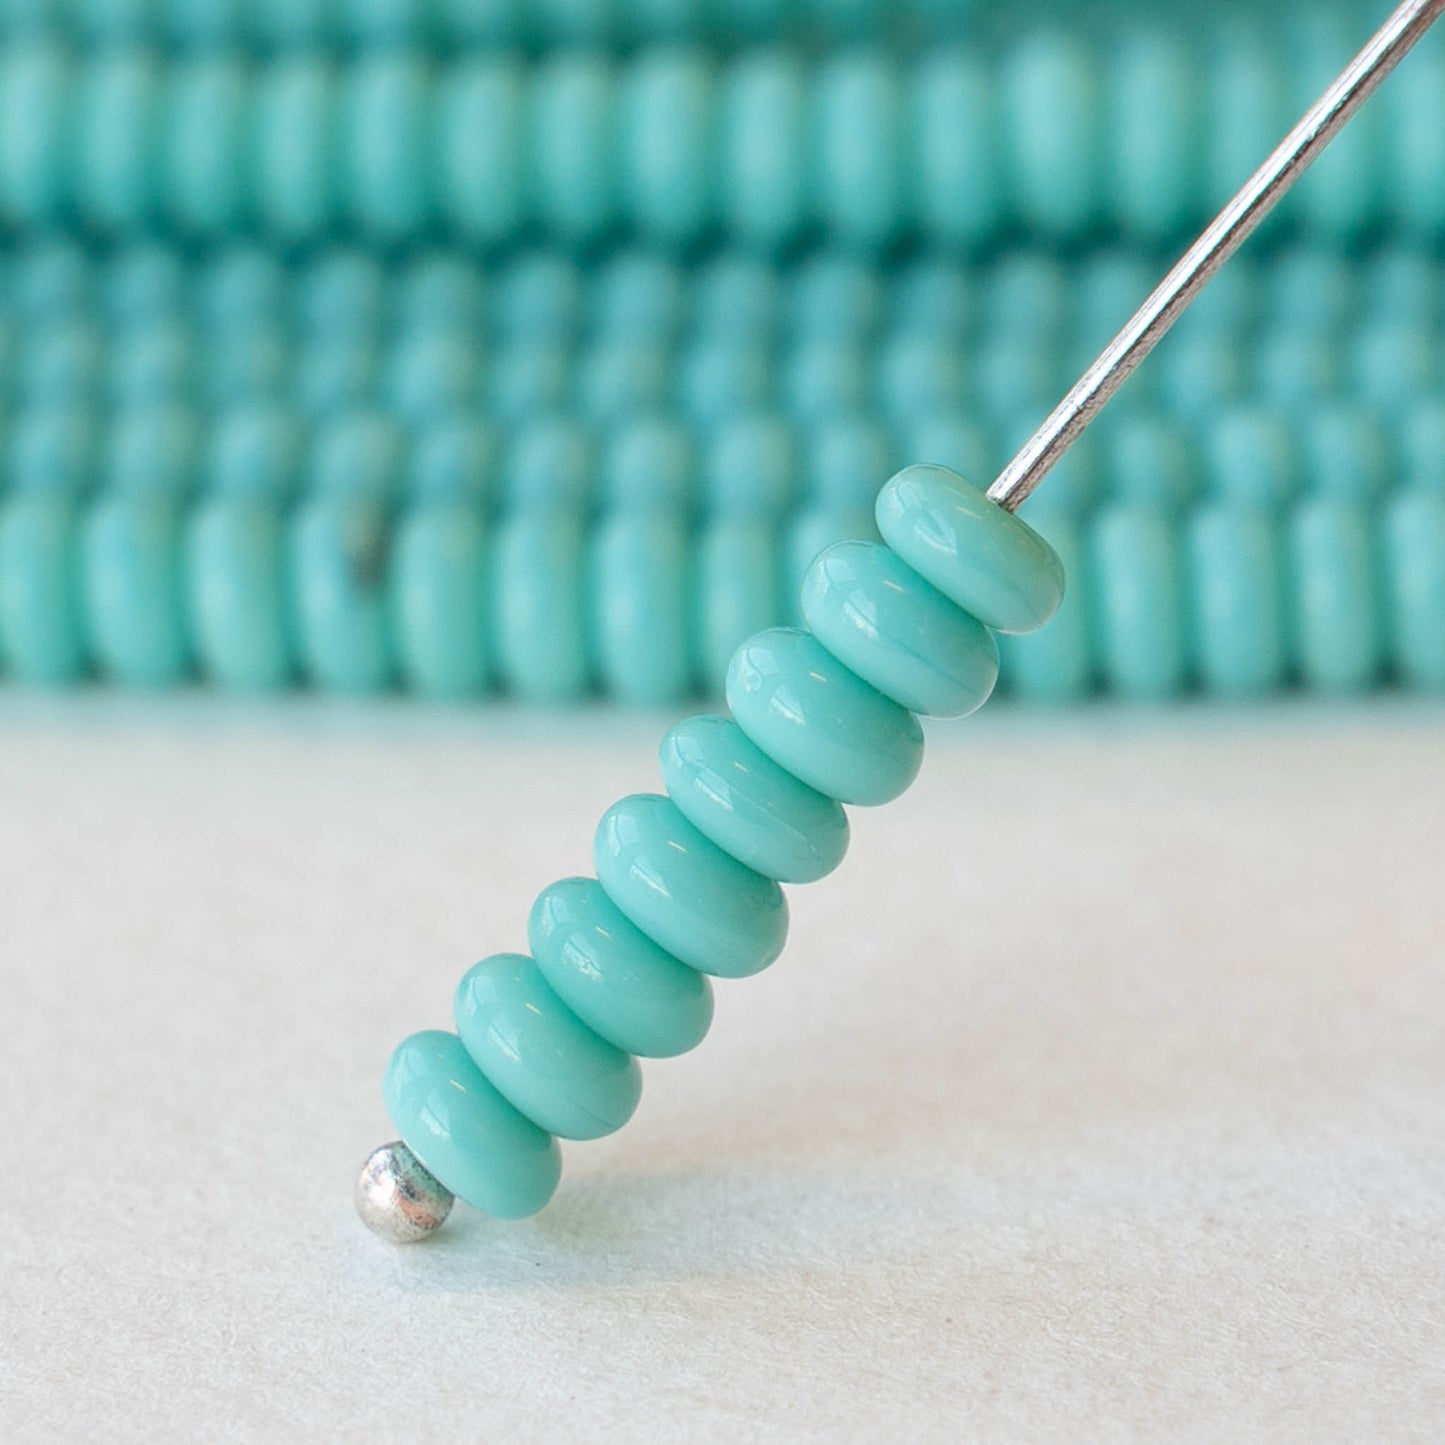 4mm Rondelle Beads - Turquoise - 100 Beads